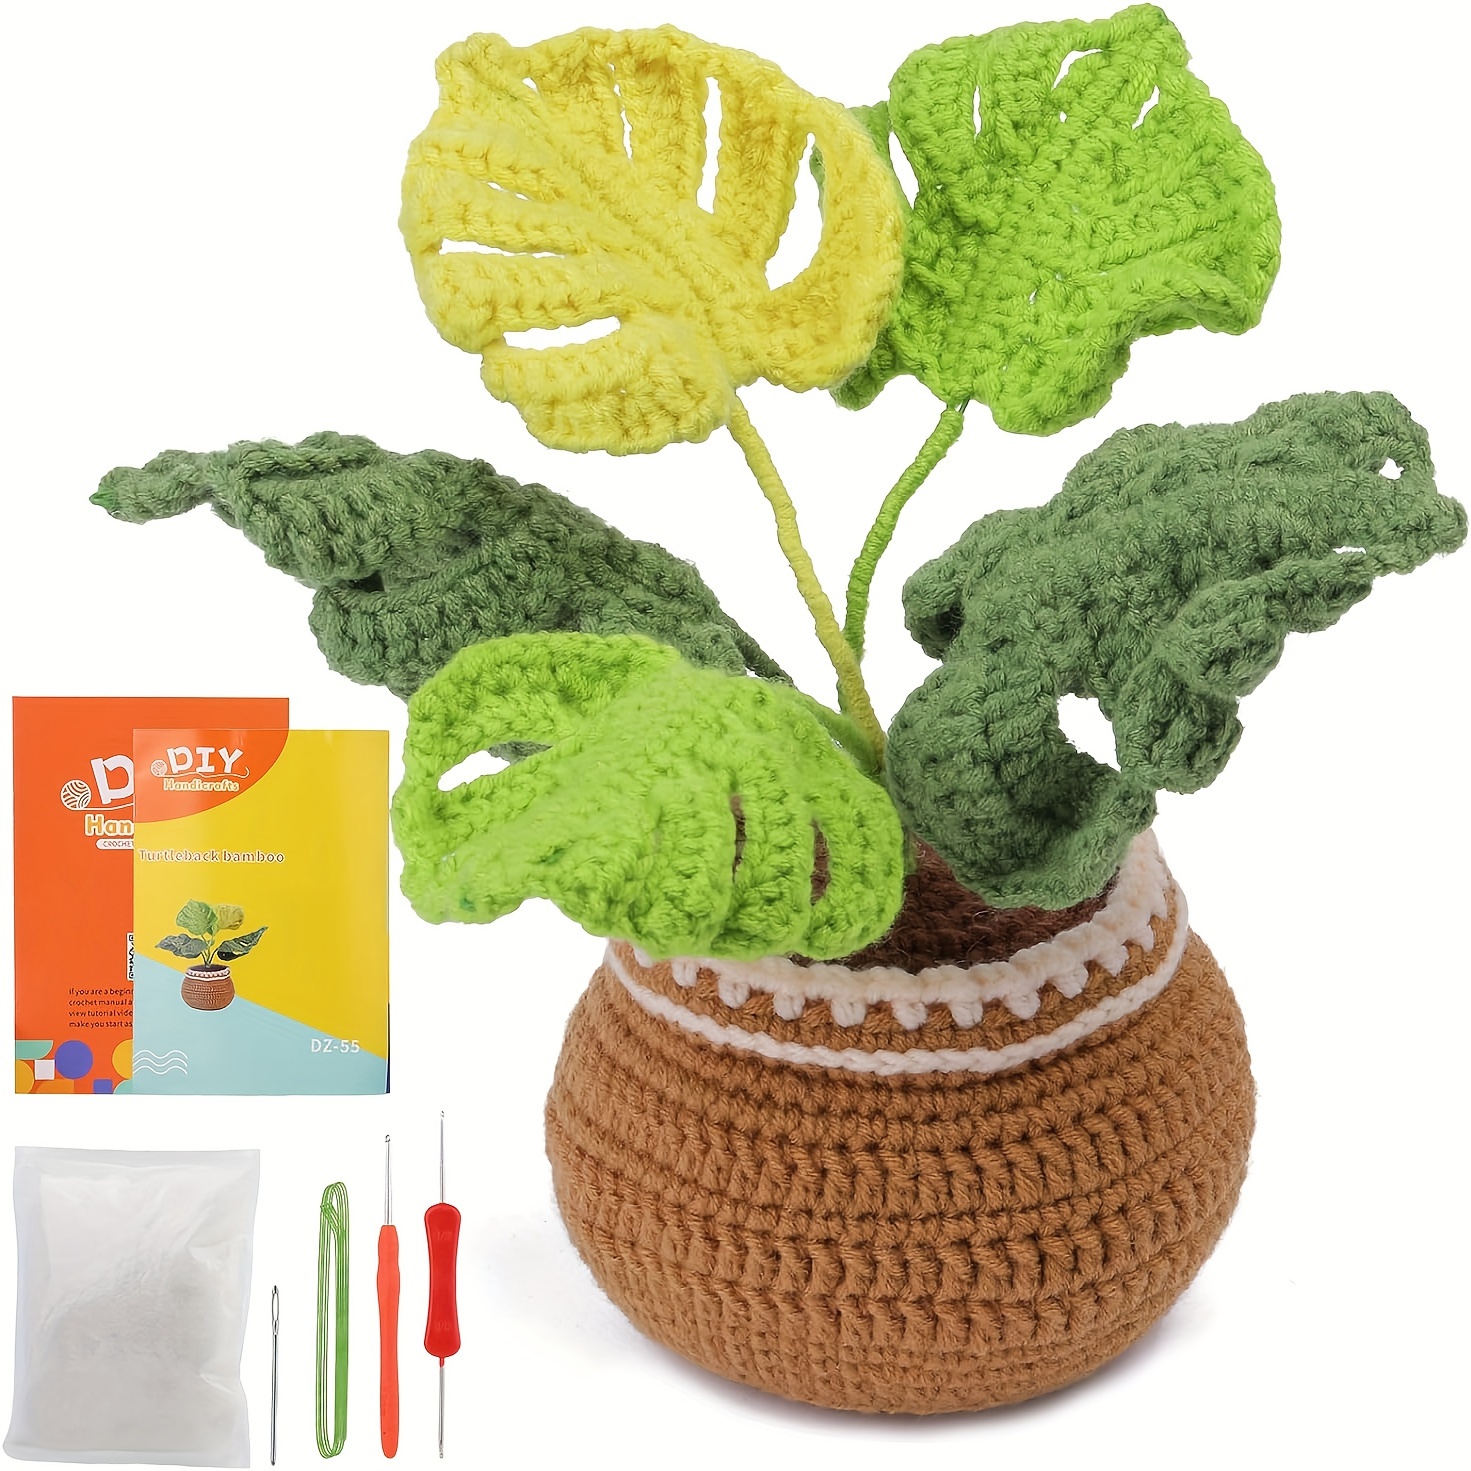 

Crochet Kit For Beginners, Monstera Leaves Crochet Kit Beginner Crochet Starter Kit For Complete Beginners Adults, Crocheting Knitting Kit With Step-by-step Video Tutorials